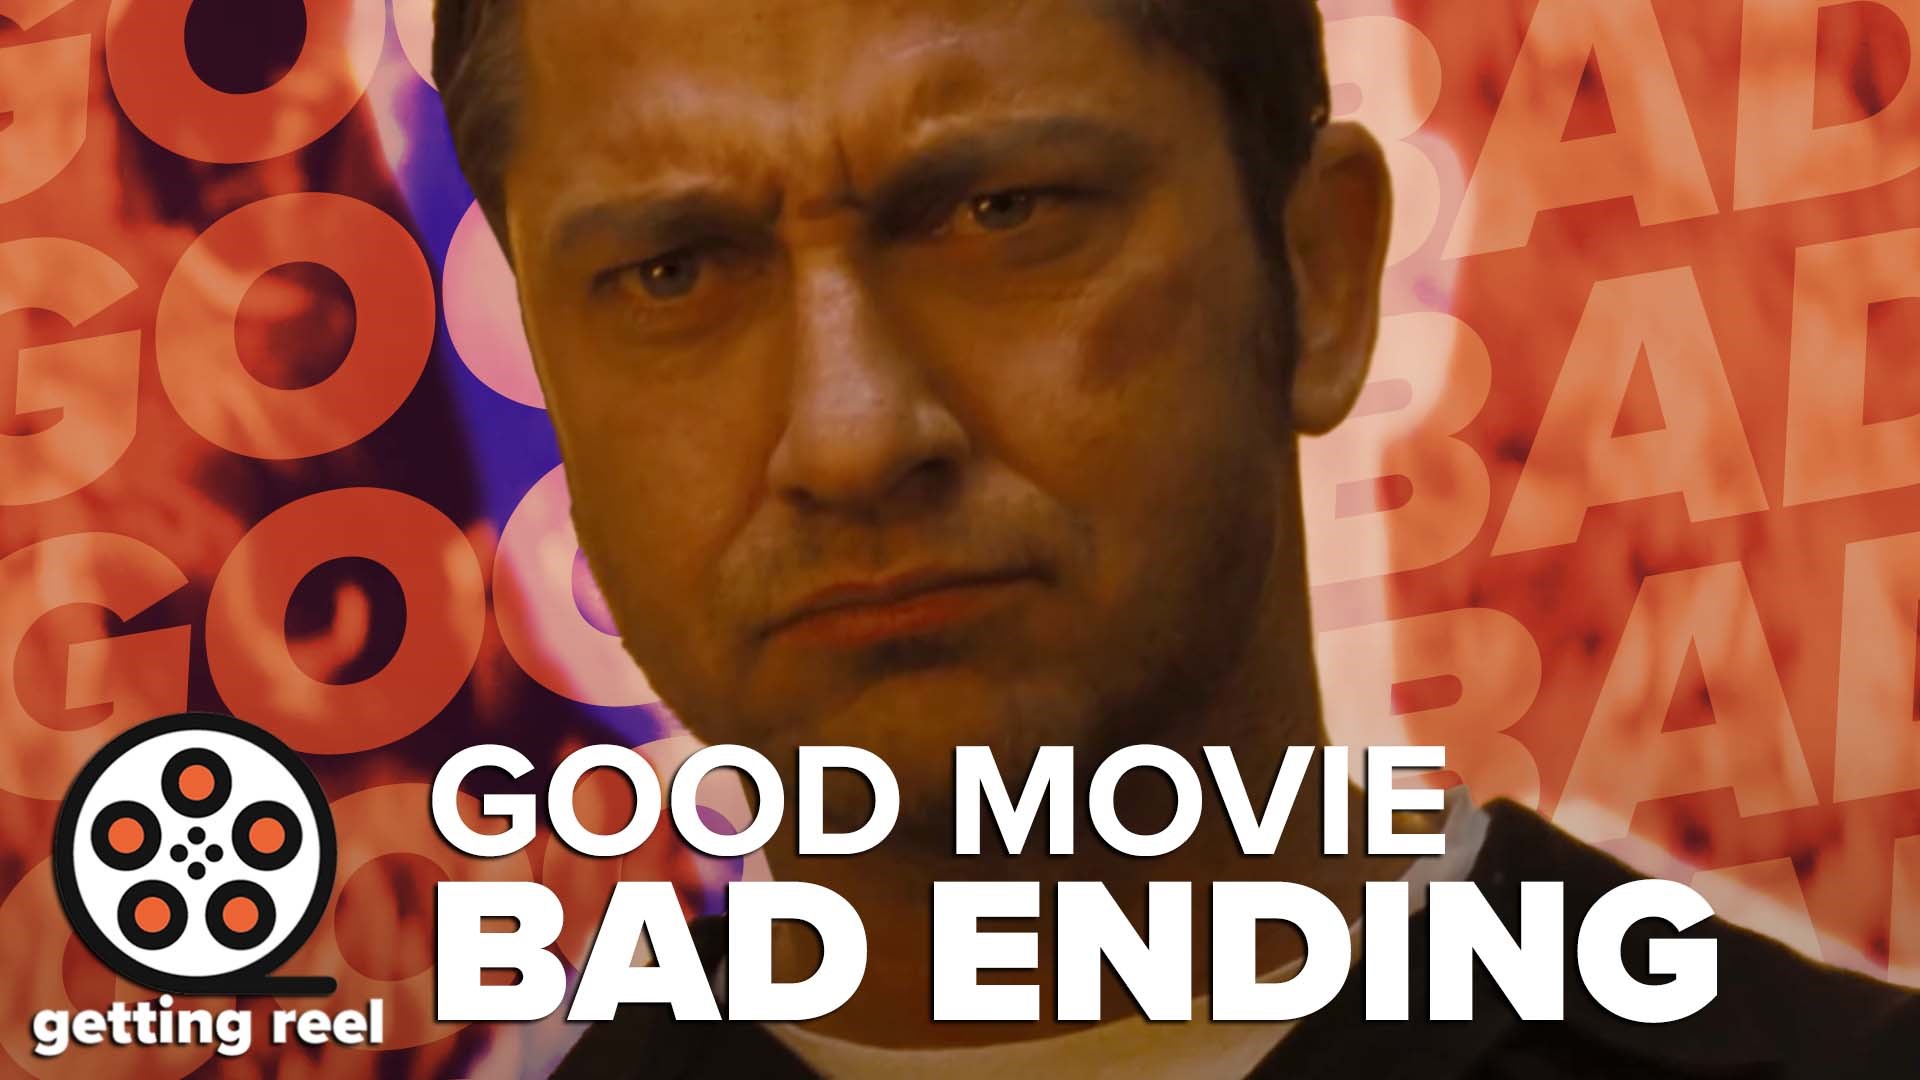 Landing the ending of a movie is a hard trick but sometimes a good movie gets ruined by a bad ending!